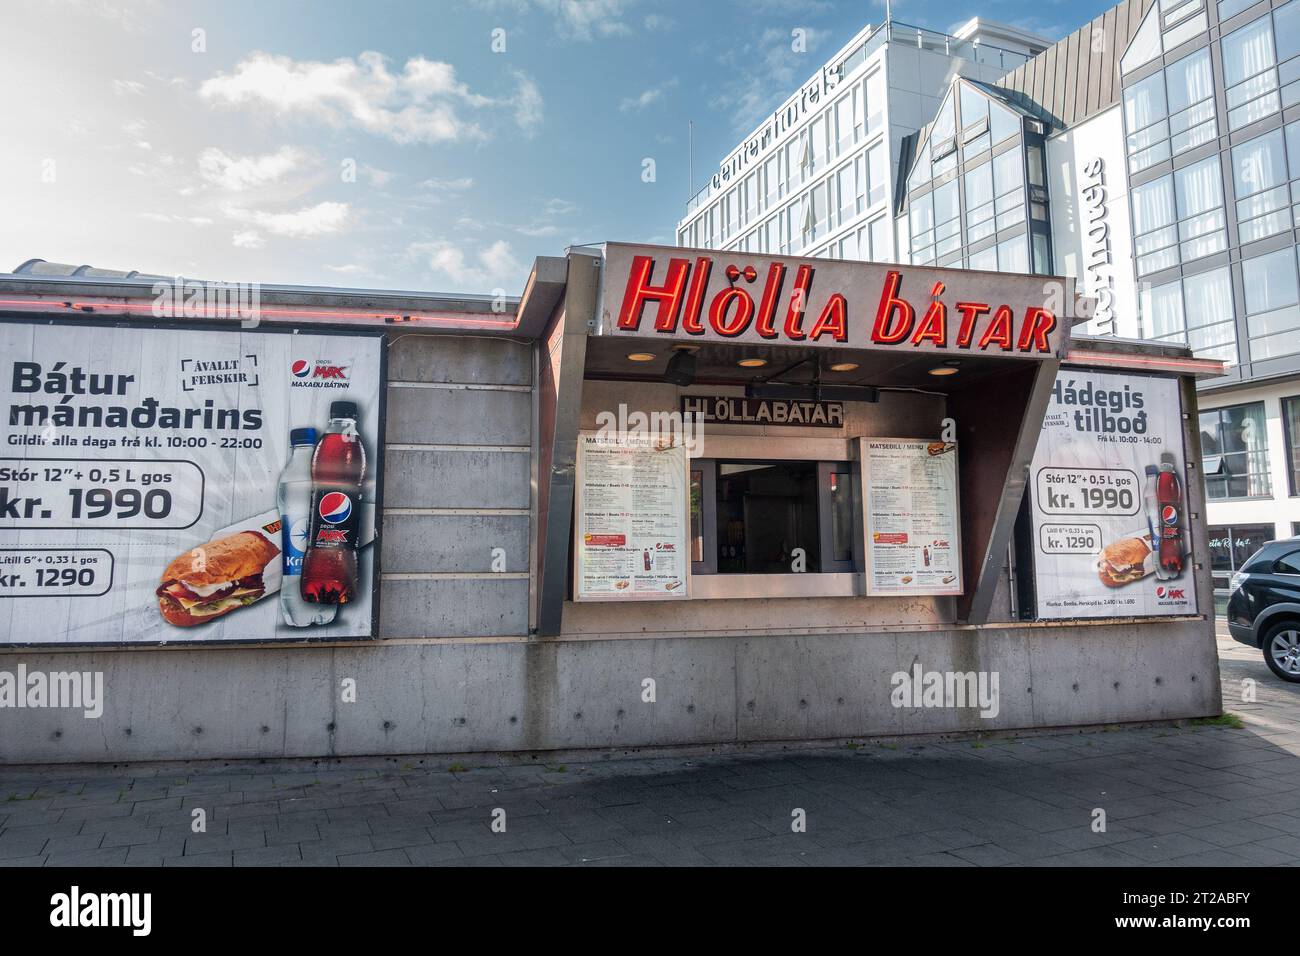 Hlolla Batar Fast Food Stand Reykjavik Iceland Advertising Sandwich Sub Combo Meal With Pepsi Soda In Downtown Reykjavik Iceland Stock Photo